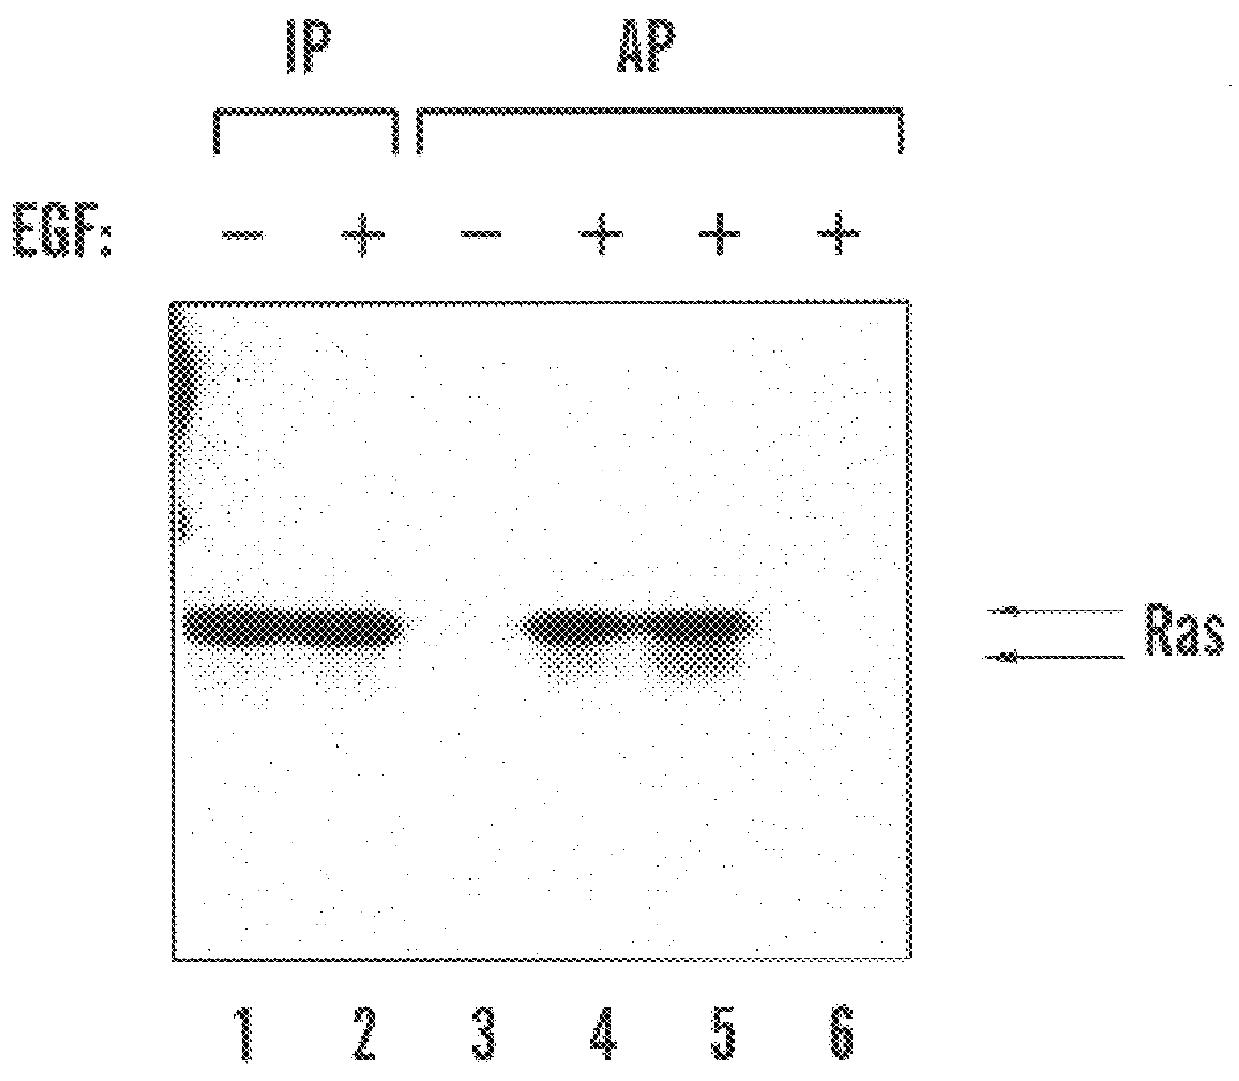 Activated ras interaction assay